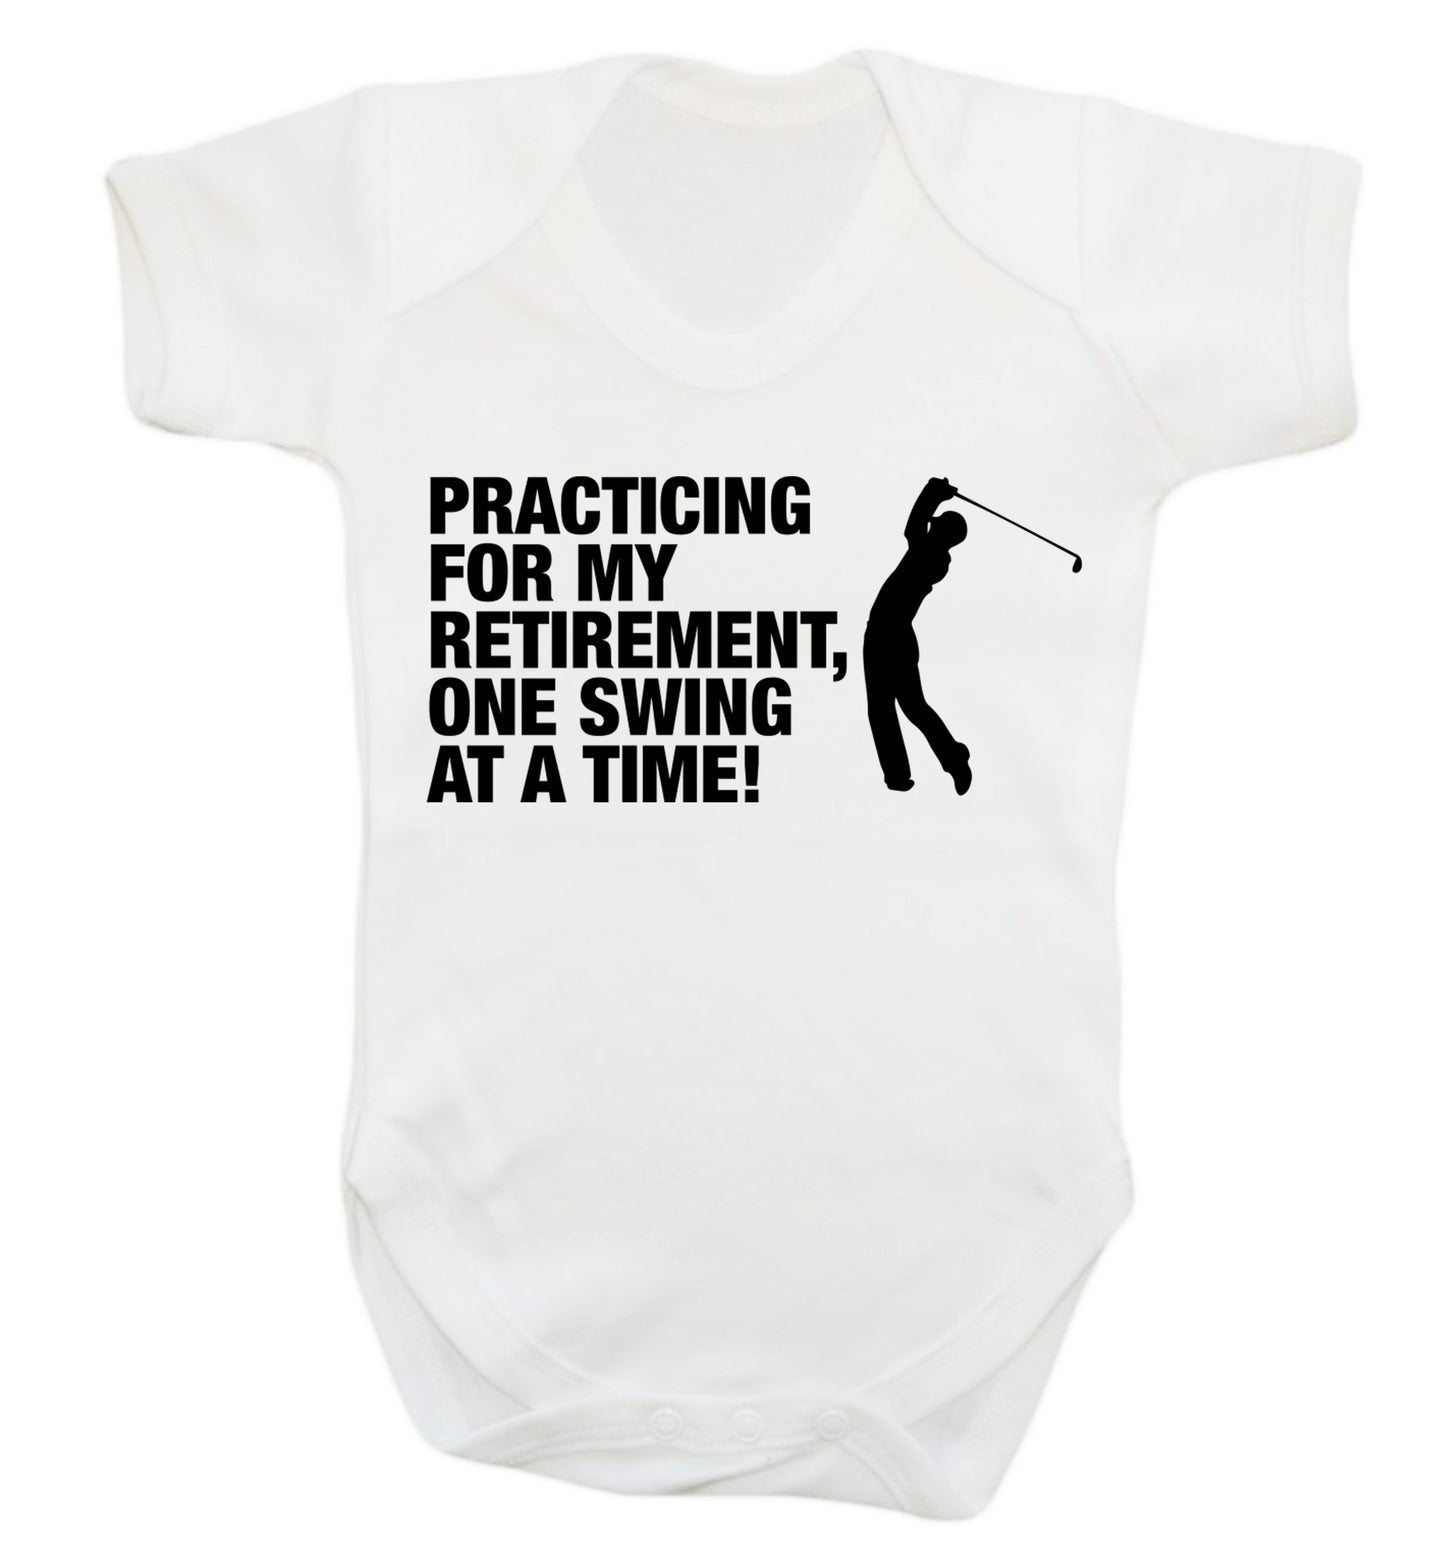 Practicing for my retirement one swing at a time Baby Vest white 18-24 months